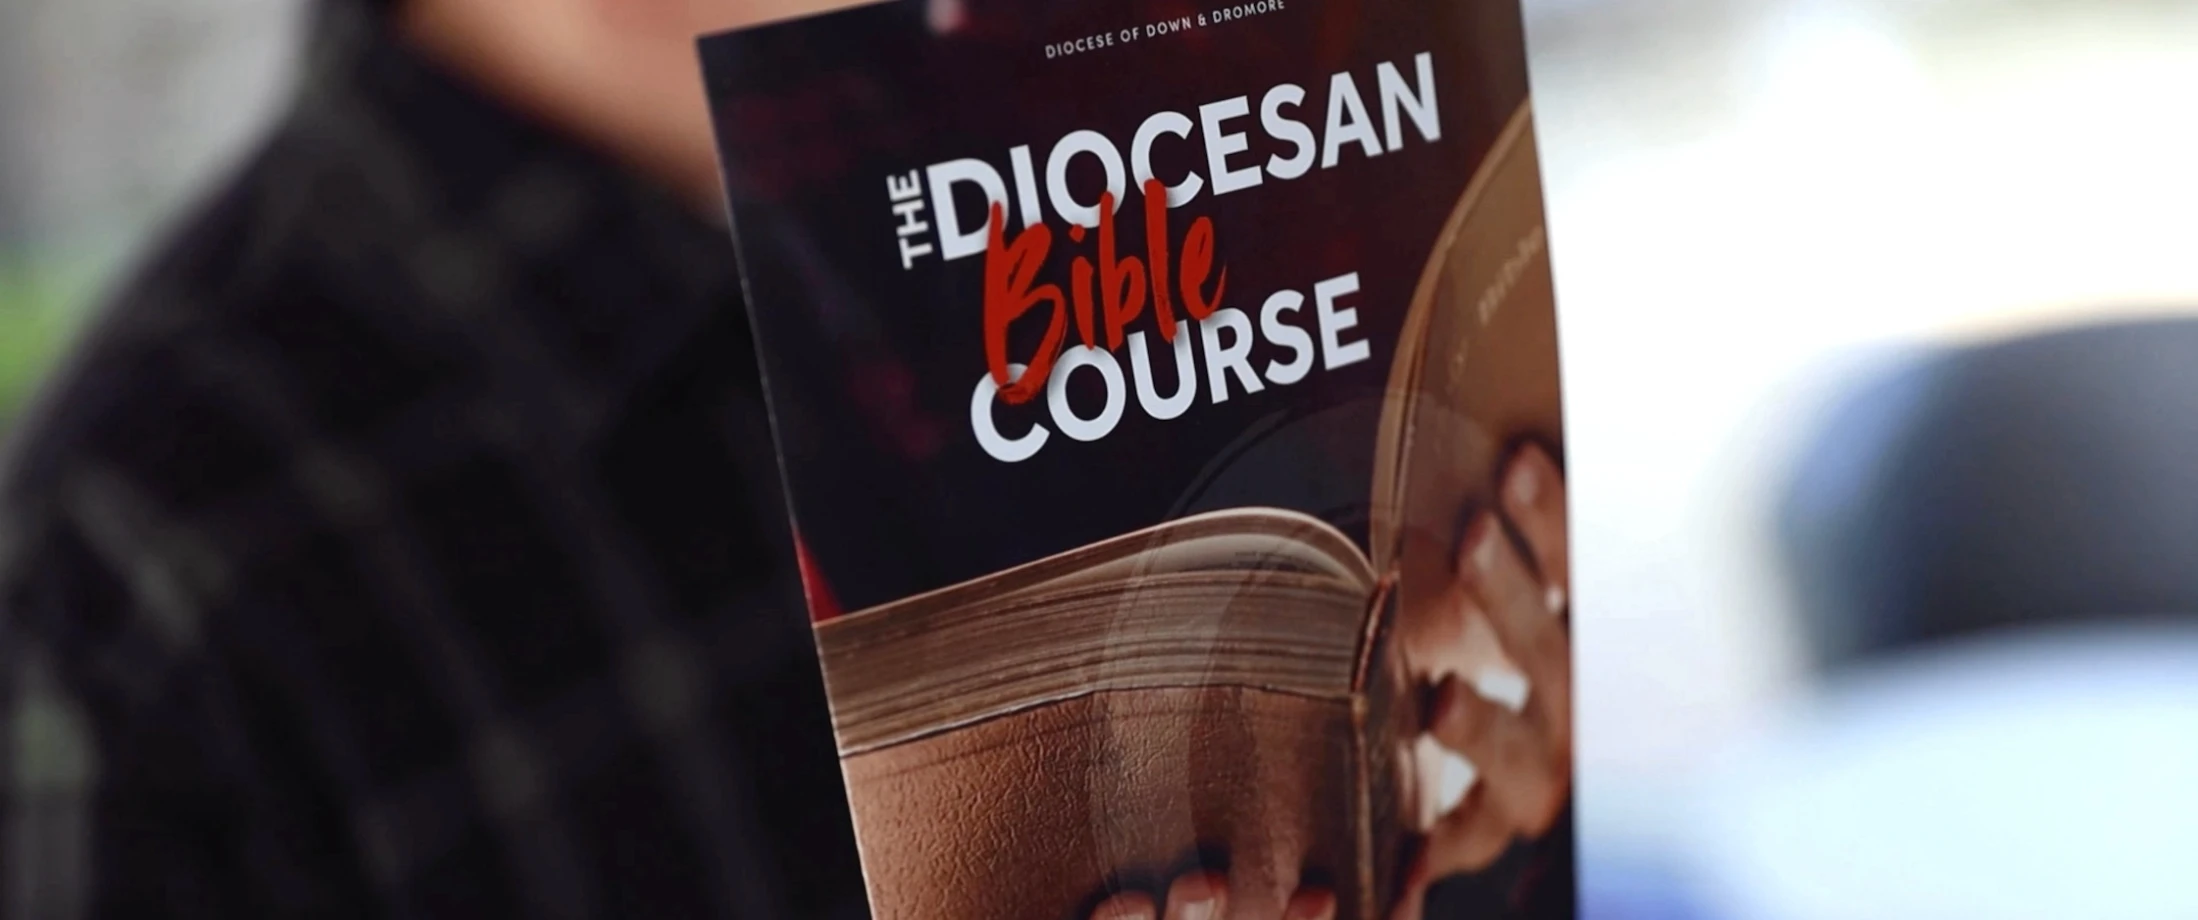 Join the Diocesan Bible Course!